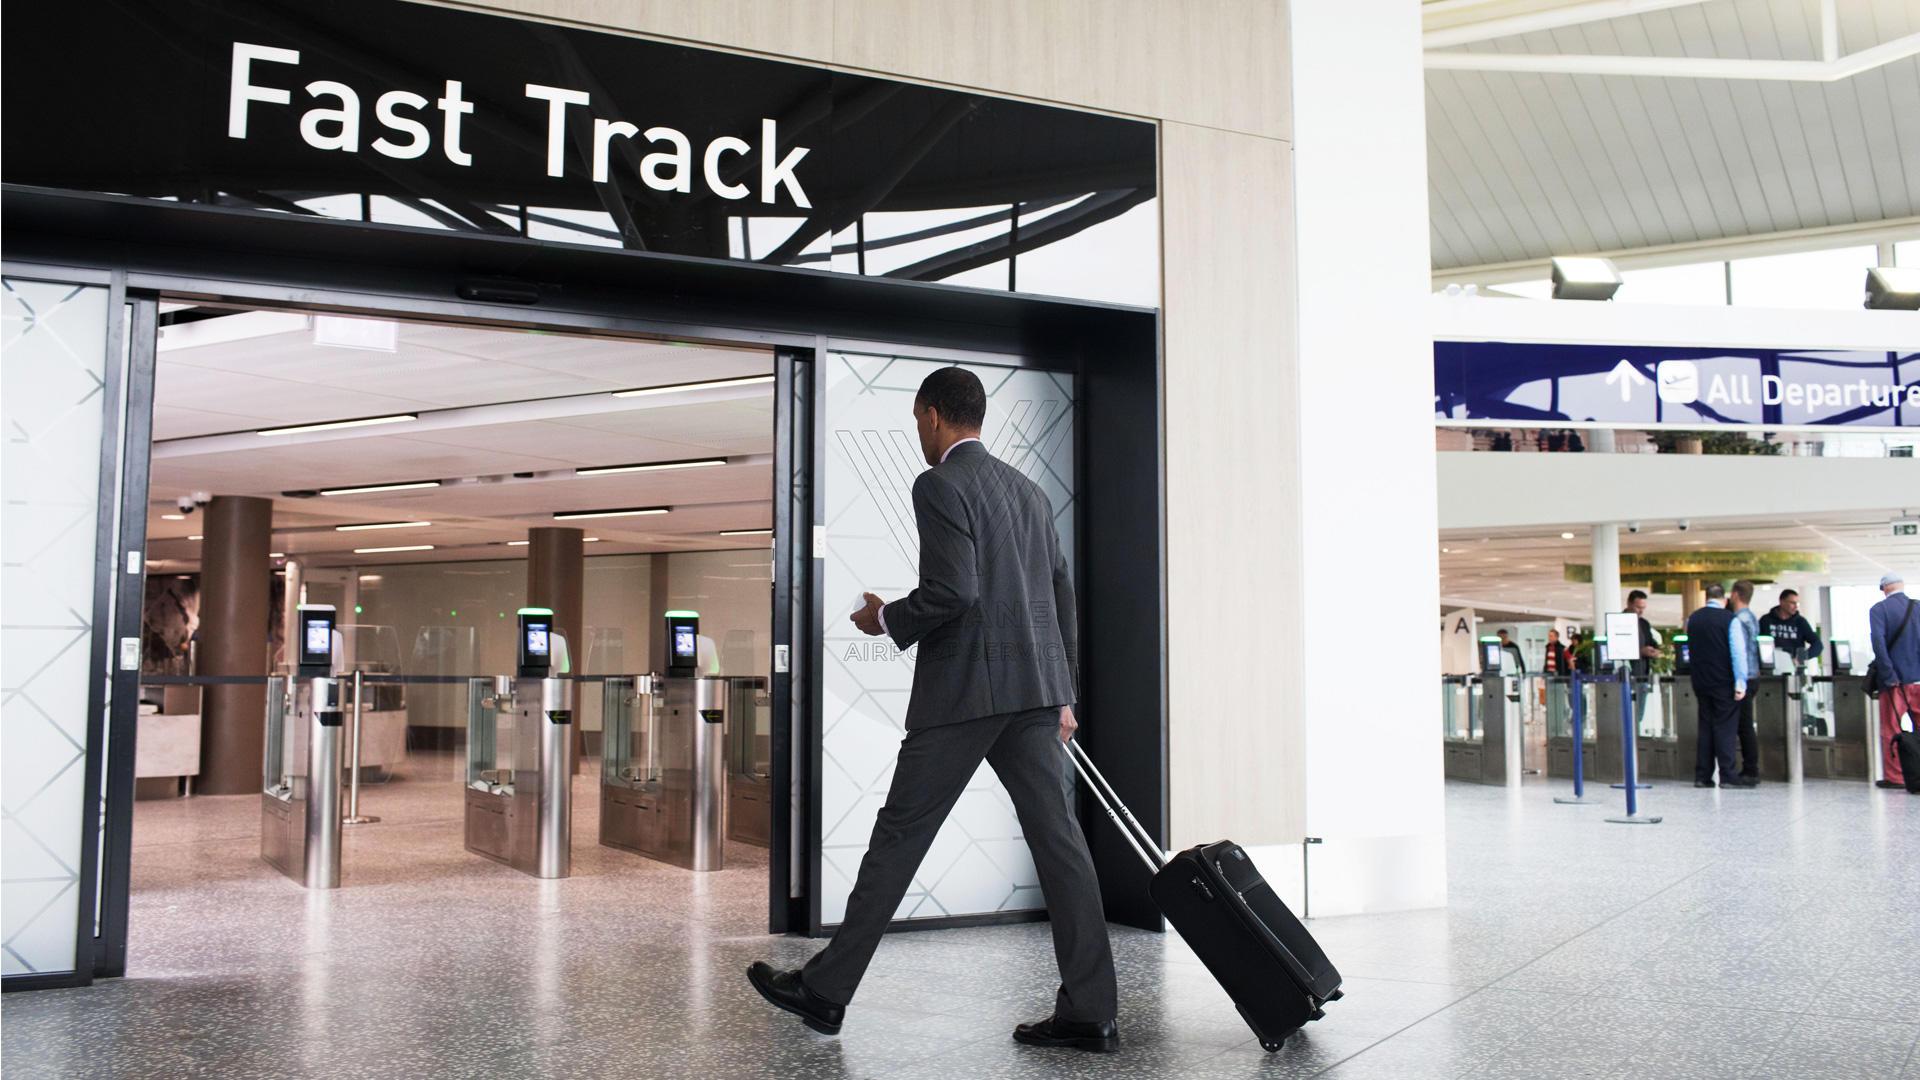 Airport services. Fast track в аэропорту. Фаст трек в аэропорту. Fast track встреча в аэропорту. VIP пассажиры в аэропорту.